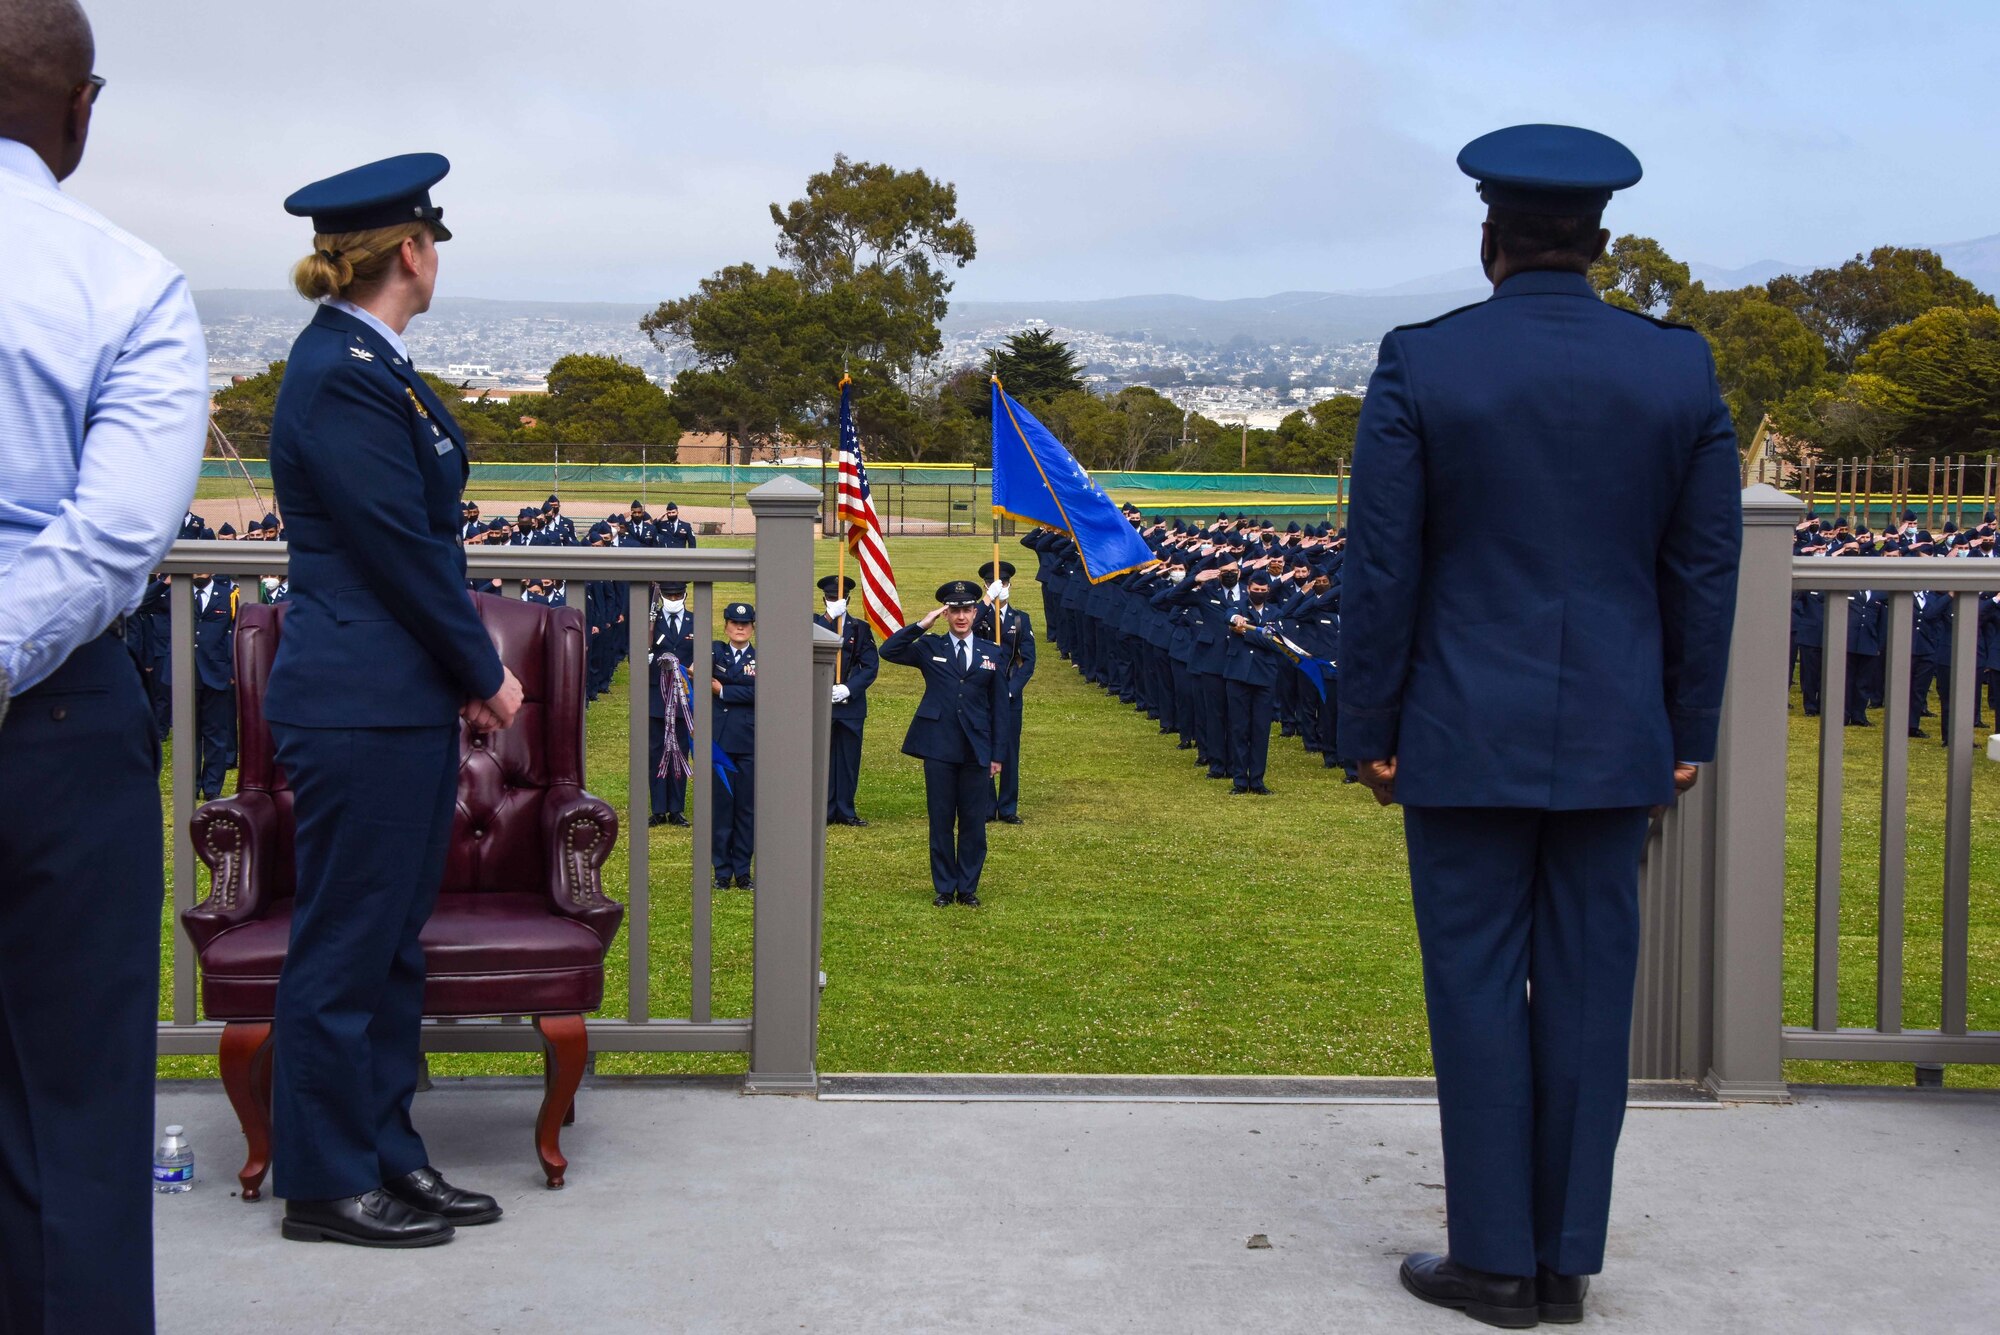 Members of the 311th Training Squadron salute their incoming commander, U.S. Air Force Lt. Col. William Taylor, at the change of command ceremony at Soldier Field, Presidio of Monterey, California, June 4, 2021.  Taylor was previously the commander of Detachment 3 at Ramstein Air Base in Germany. (Photo courtesy of Natela Cutter)